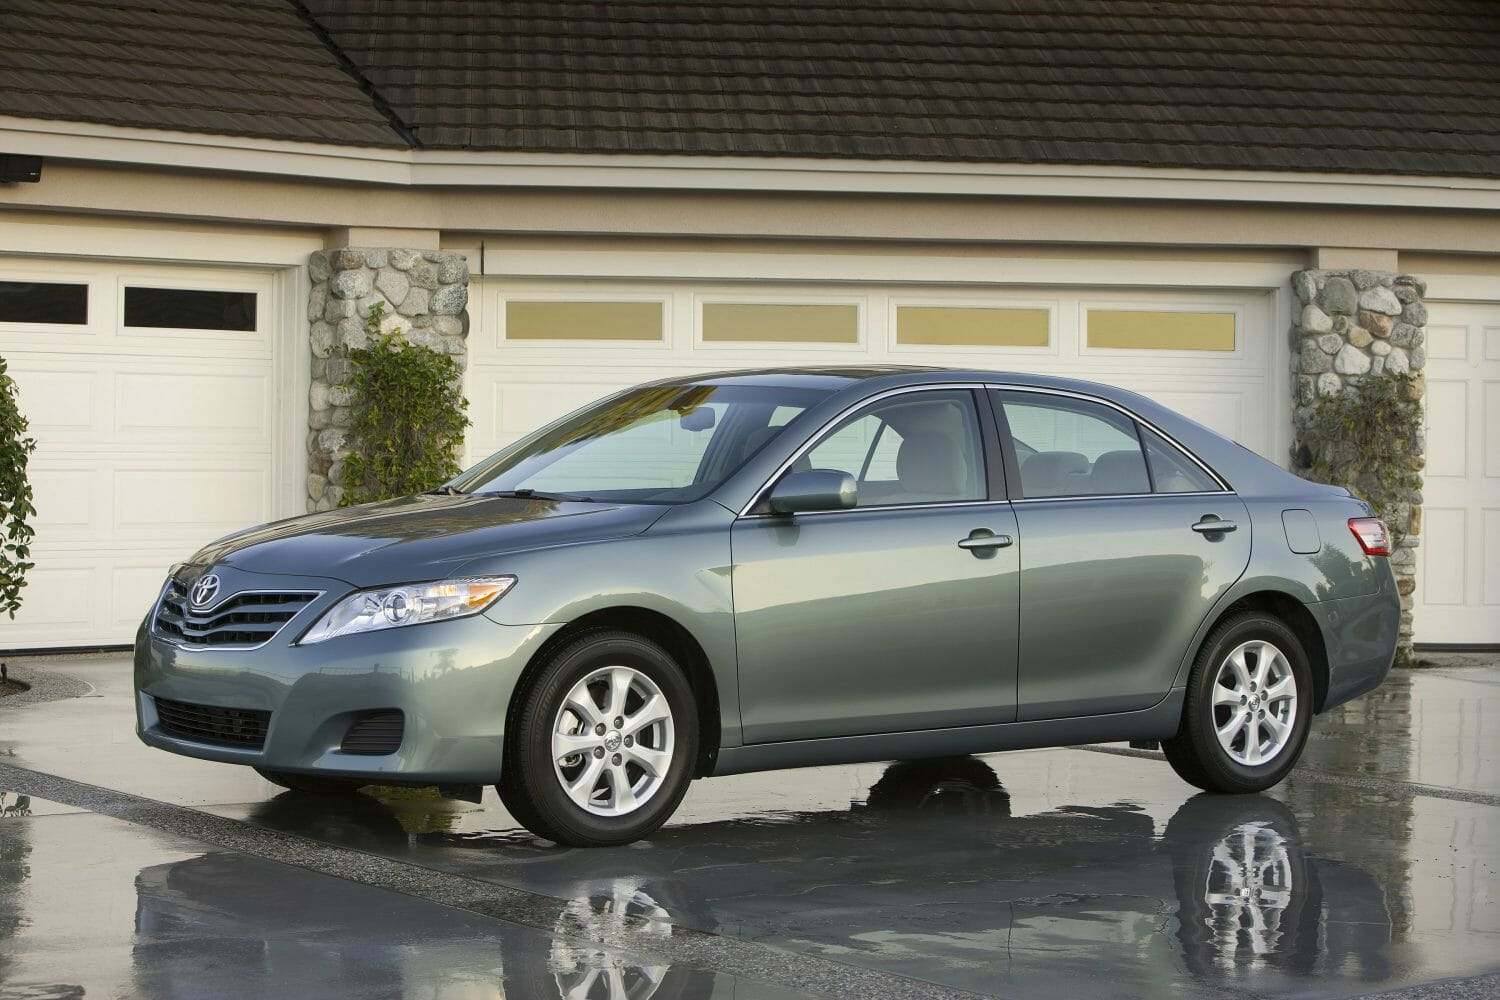 2011 Toyota Camry Review: A Midsize Sedan Built To Last